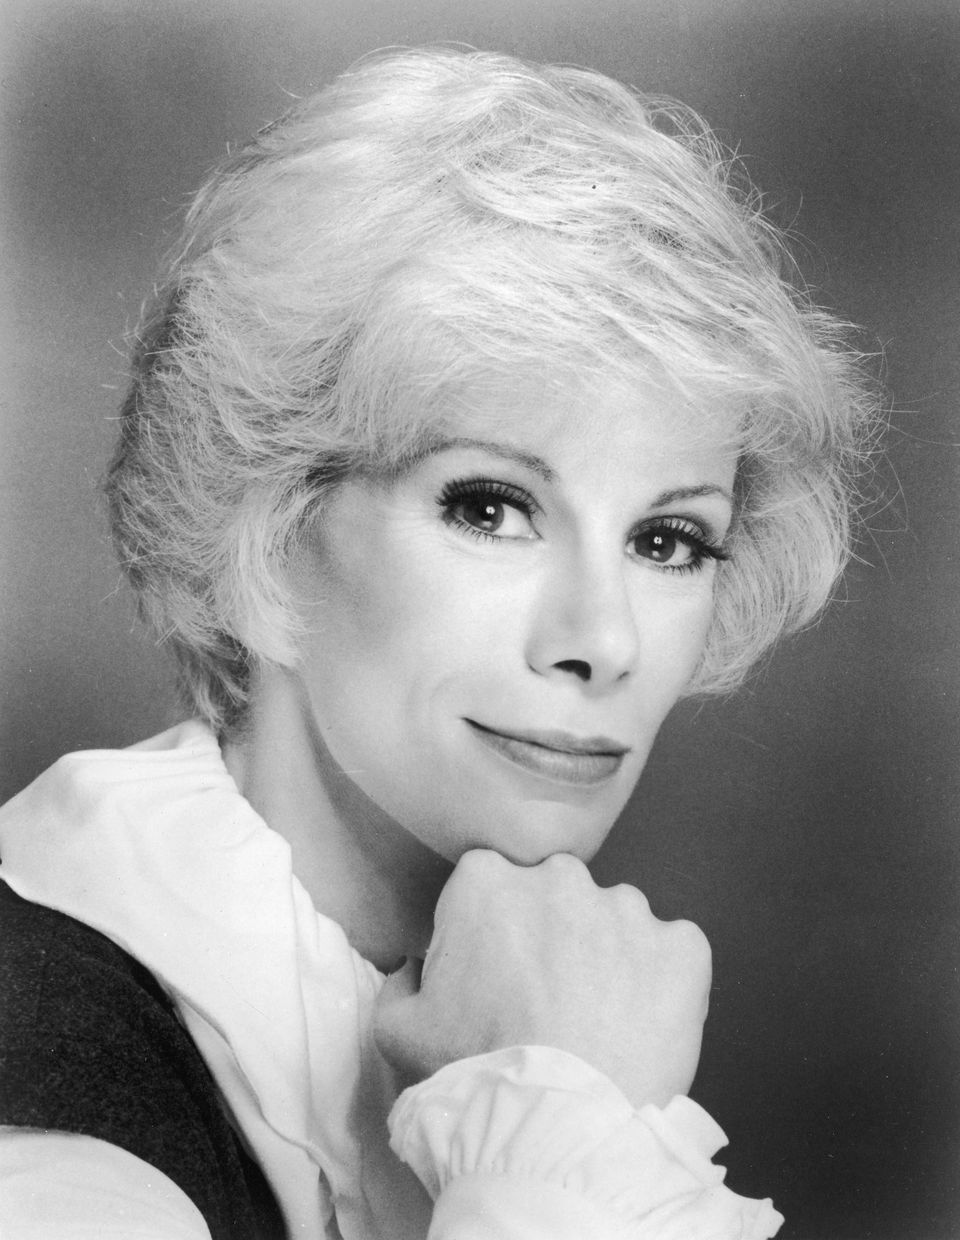 "<a href="http://www.theguardian.com/stage/2012/aug/09/comedy-gold-joan-rivers" role="link" class=" js-entry-link cet-external-link" data-vars-item-name="I hate thin people" data-vars-item-type="text" data-vars-unit-name="5b9e6ce0e4b03a1dcc97847c" data-vars-unit-type="buzz_body" data-vars-target-content-id="http://www.theguardian.com/stage/2012/aug/09/comedy-gold-joan-rivers" data-vars-target-content-type="url" data-vars-type="web_external_link" data-vars-subunit-name="before_you_go_slideshow" data-vars-subunit-type="component" data-vars-position-in-subunit="0">I hate thin people</a>; 'Oh, does the tampon make me look fat?'"